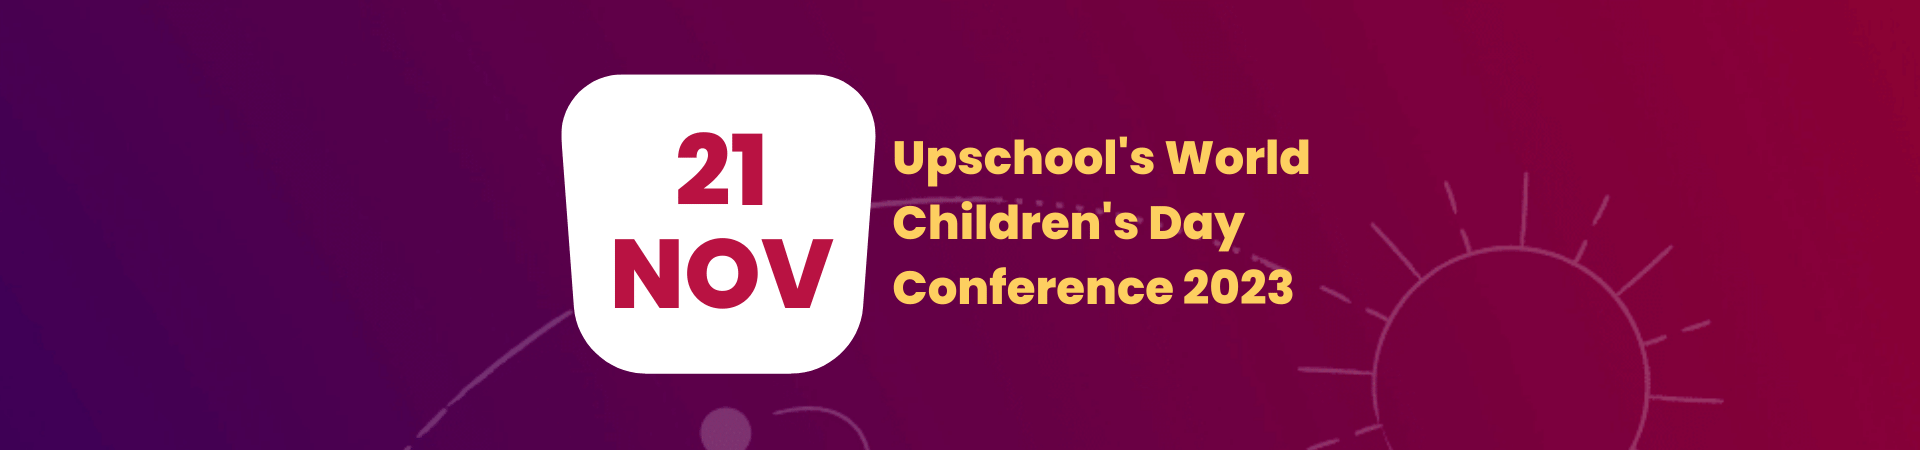 Upschool’s World Children’s Day Conference 2023